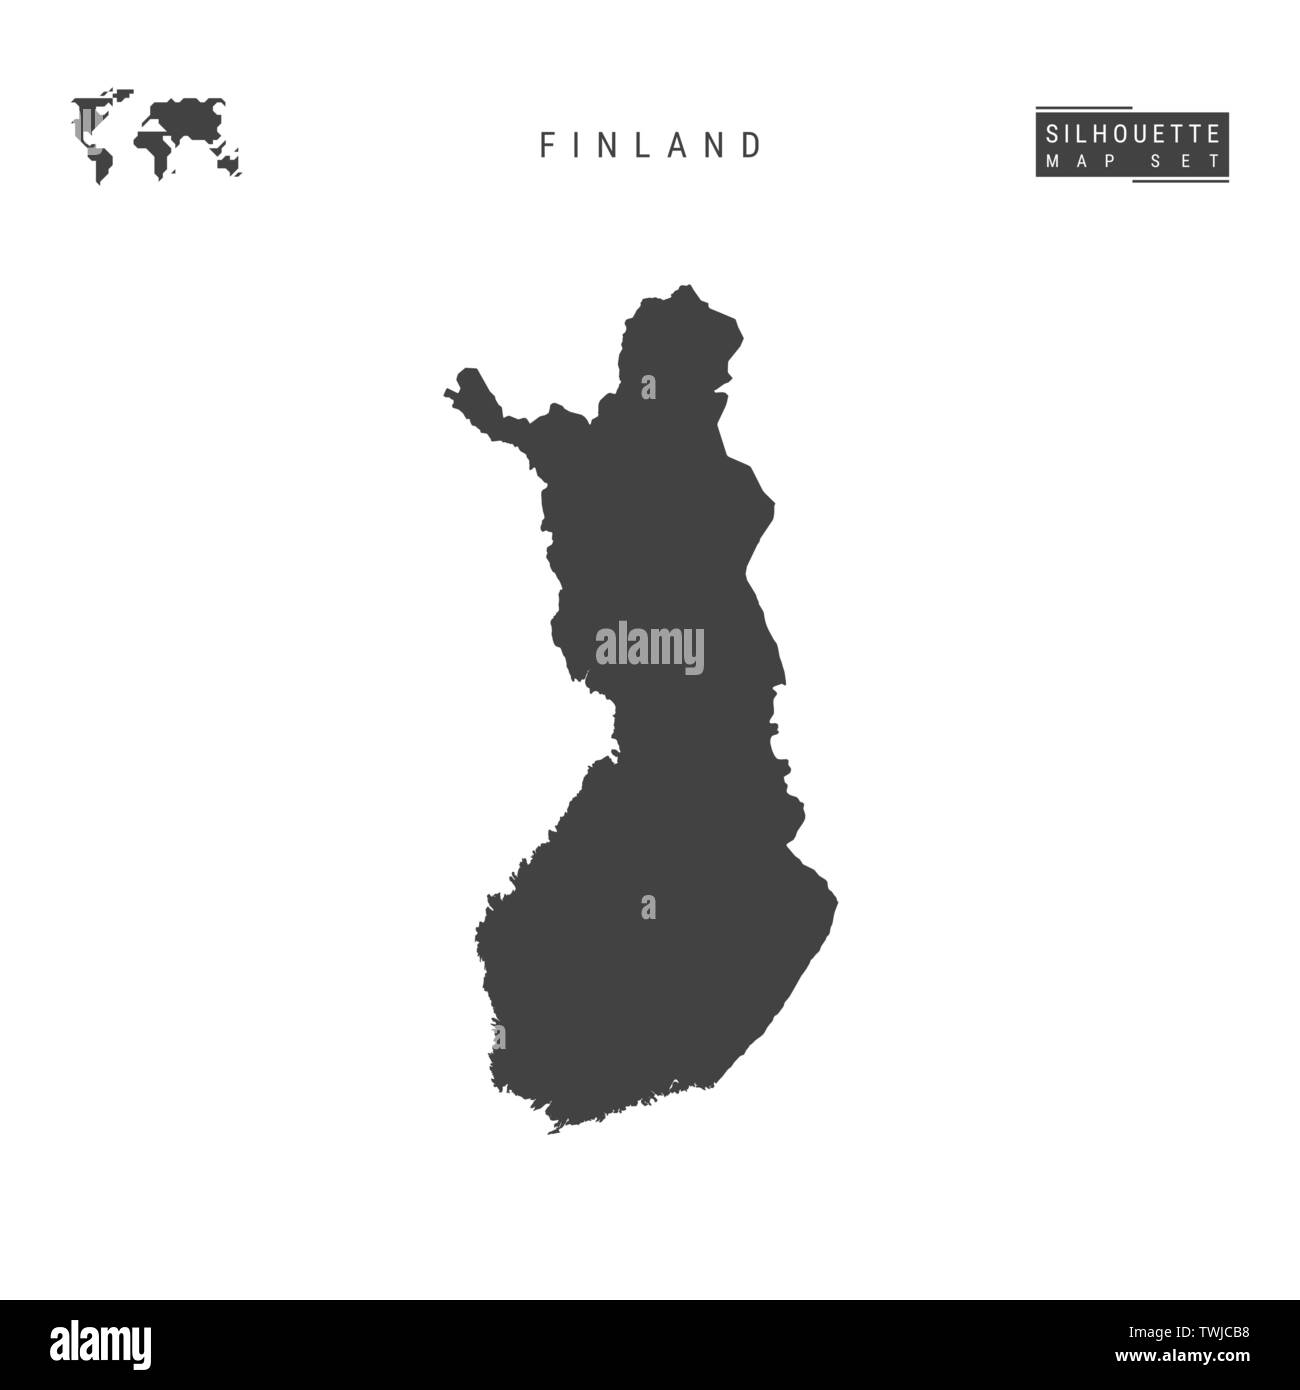 Finland Blank Vector Map Isolated on White Background. High-Detailed Black Silhouette Map of Finland. Stock Vector